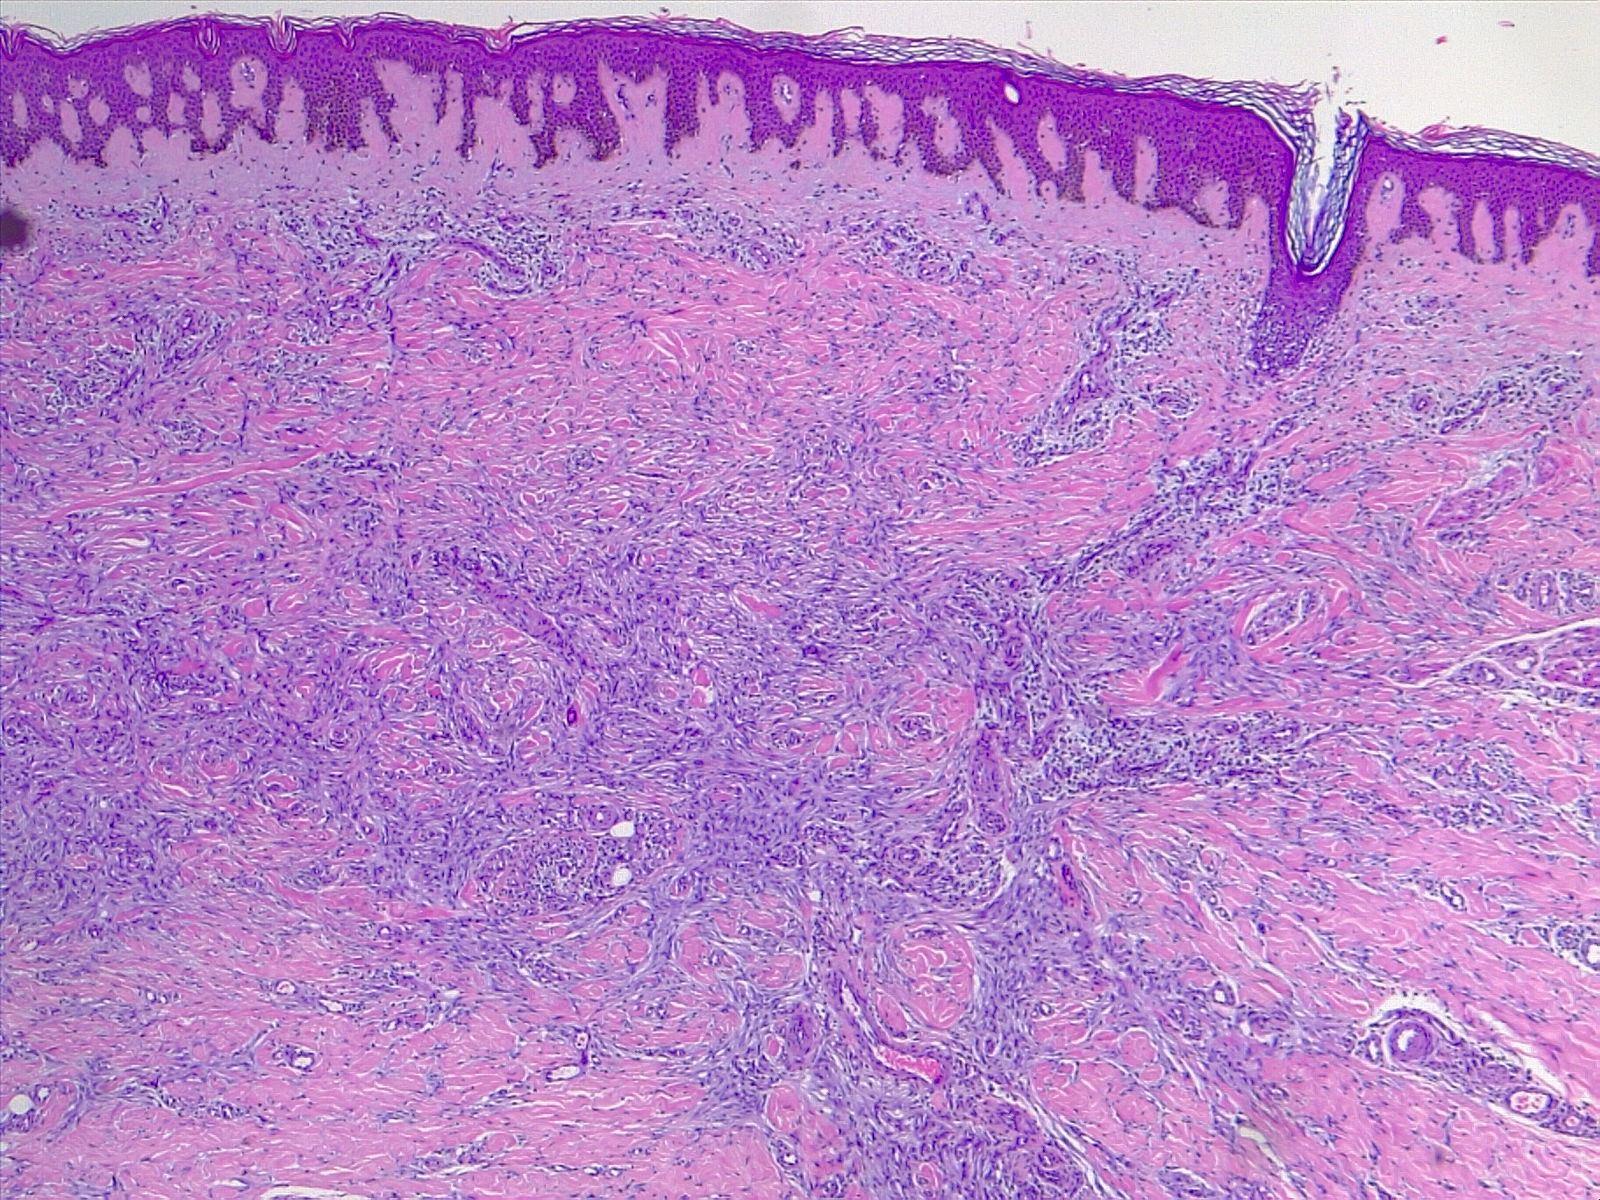 Dermatofibroma, H/E 4x. Low power view of a dermal proliferation of spindle cells entrapping collagen bundles.